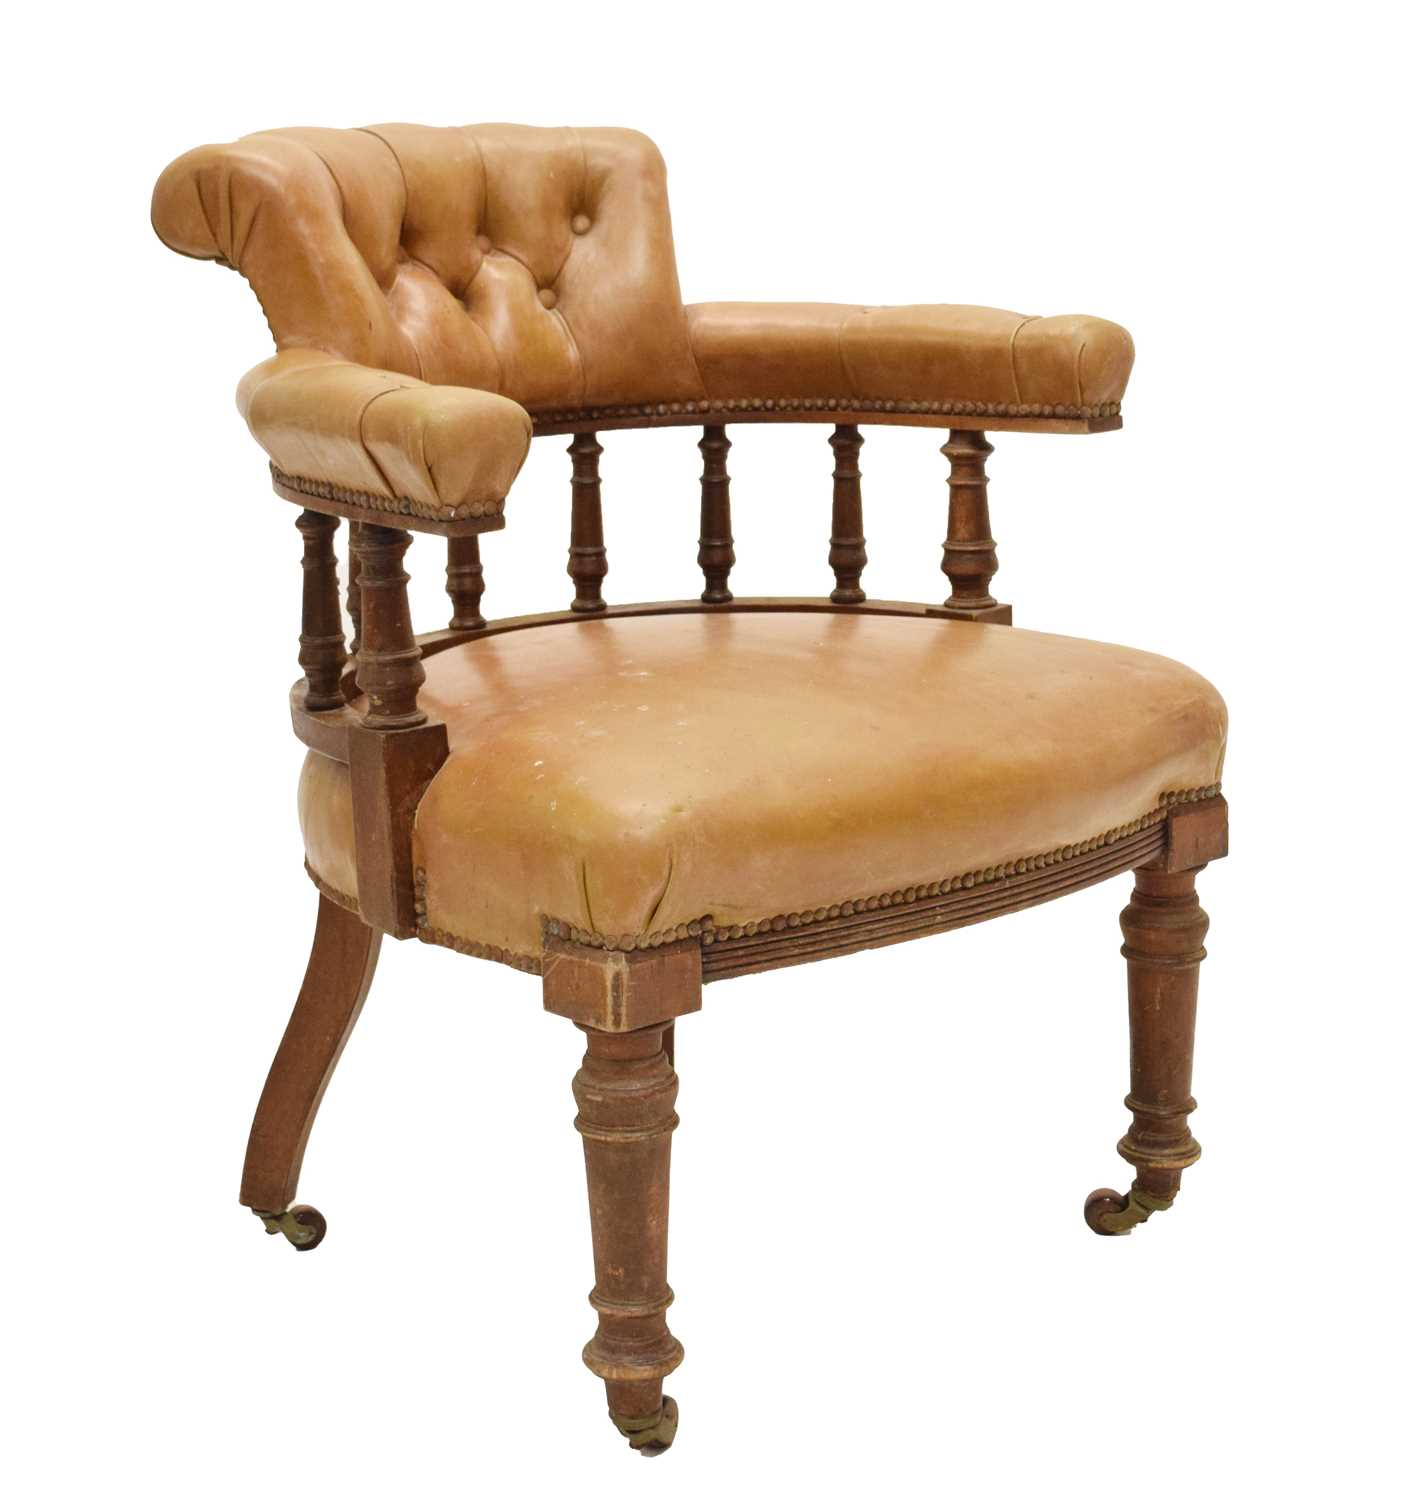 Early 20th century button upholstered smoker's bow-type chair